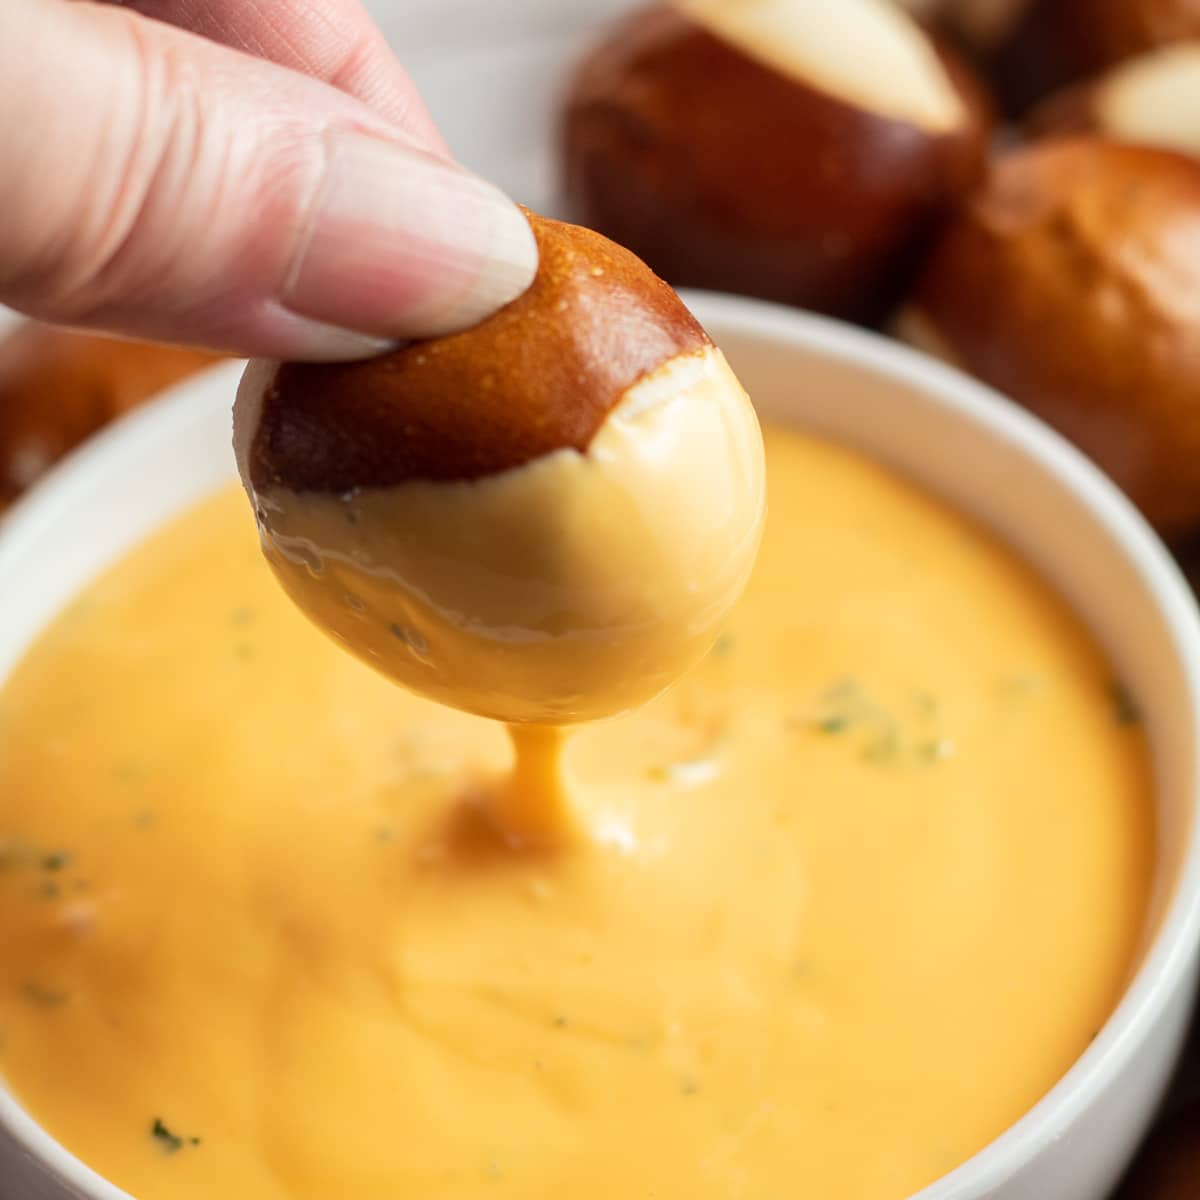 Square image of a pretzel bite being dipped into cheese dip.